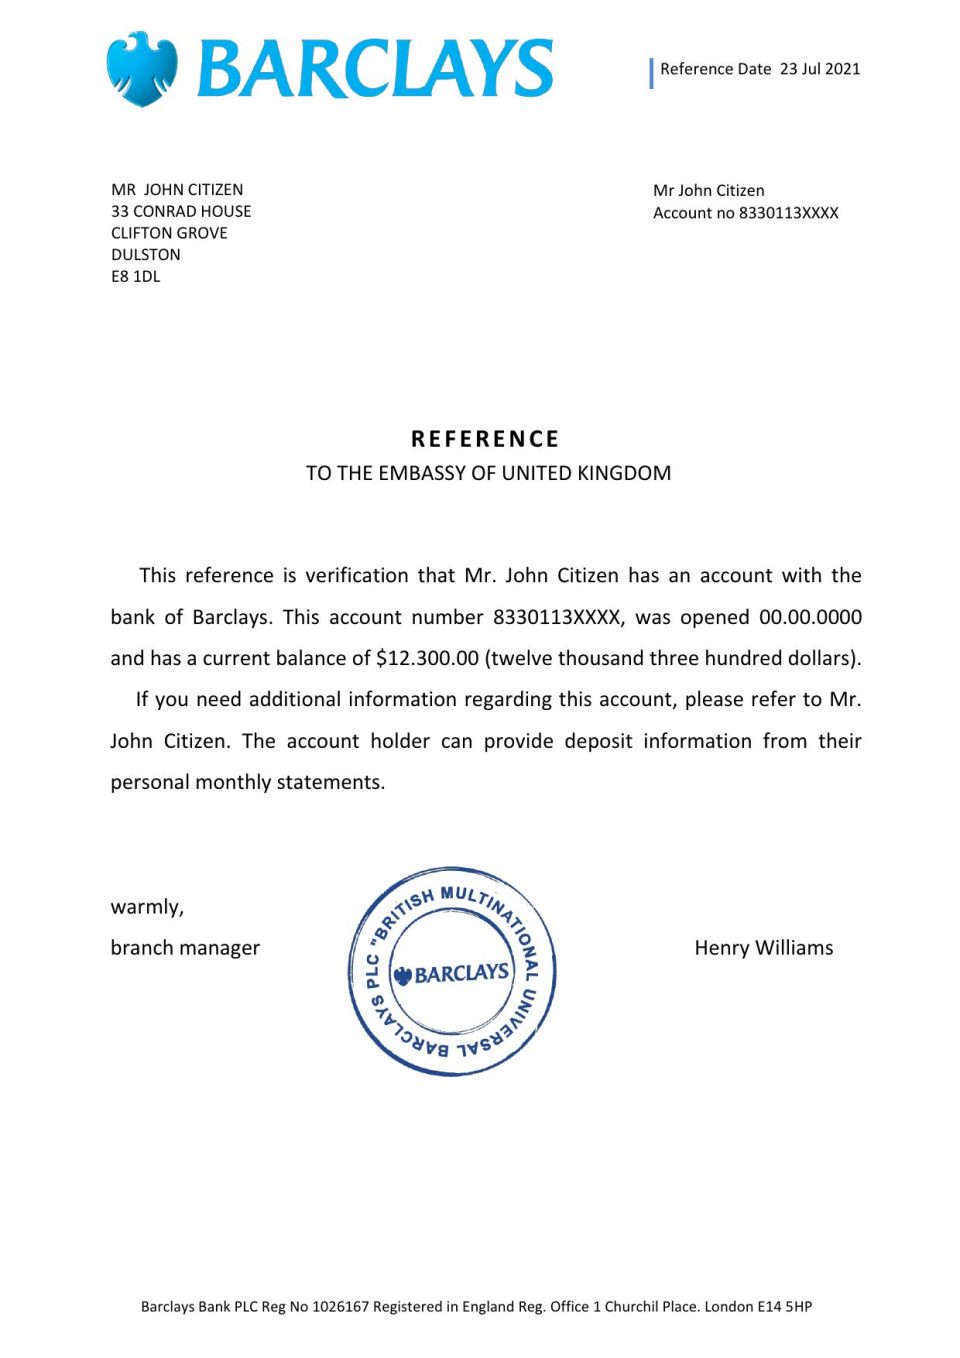 Download United Kingdom Barclays Bank Reference Letter Templates | Editable Word